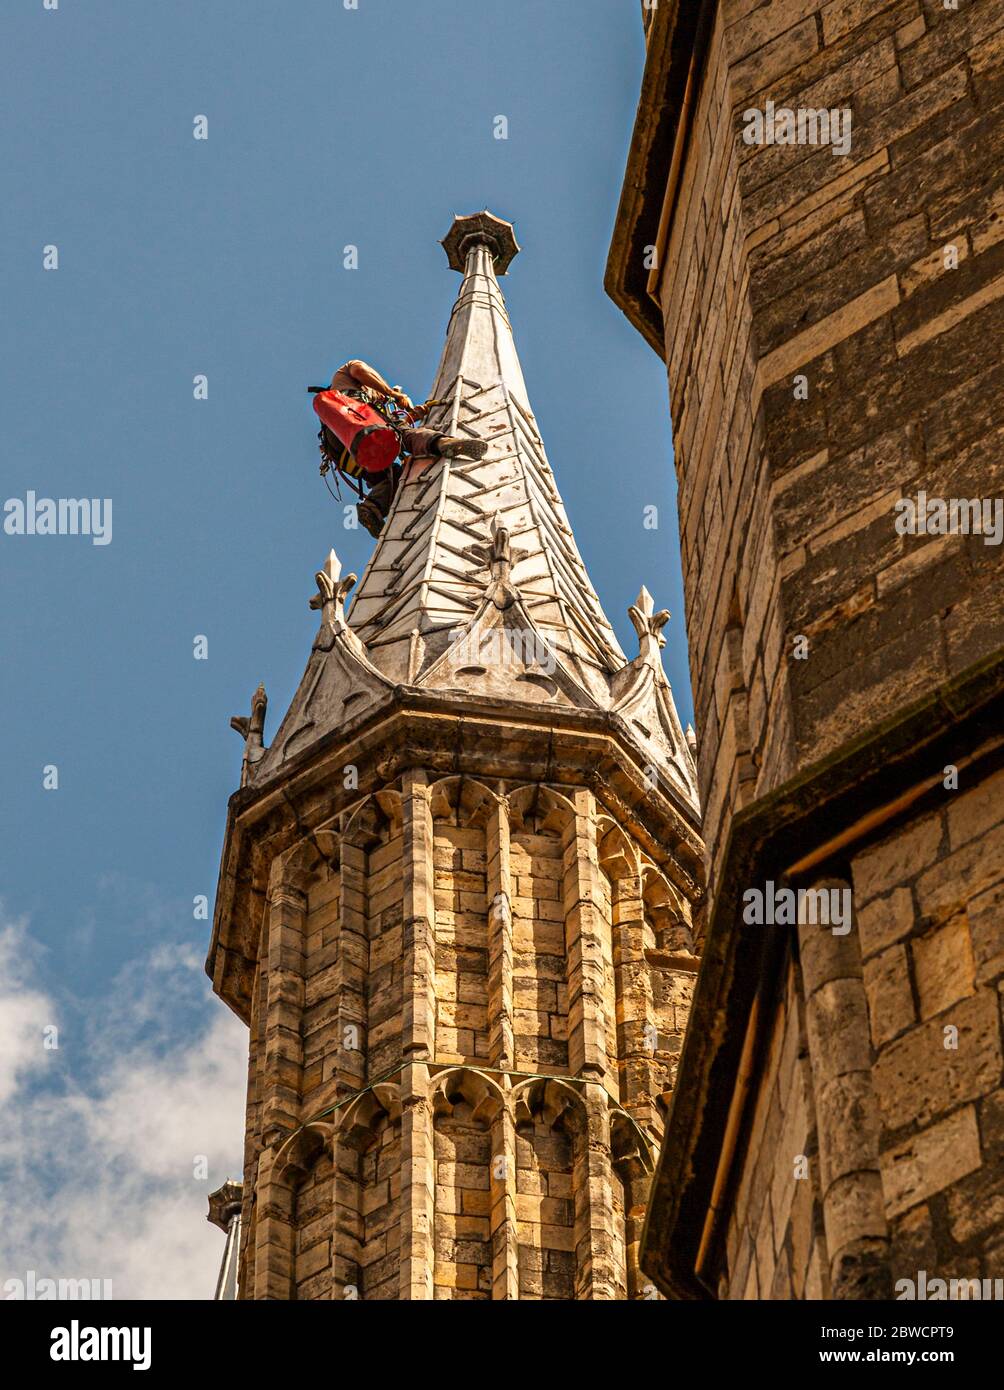 Tinsmith repairing the Roof of Lincoln Cathedral Stock Photo